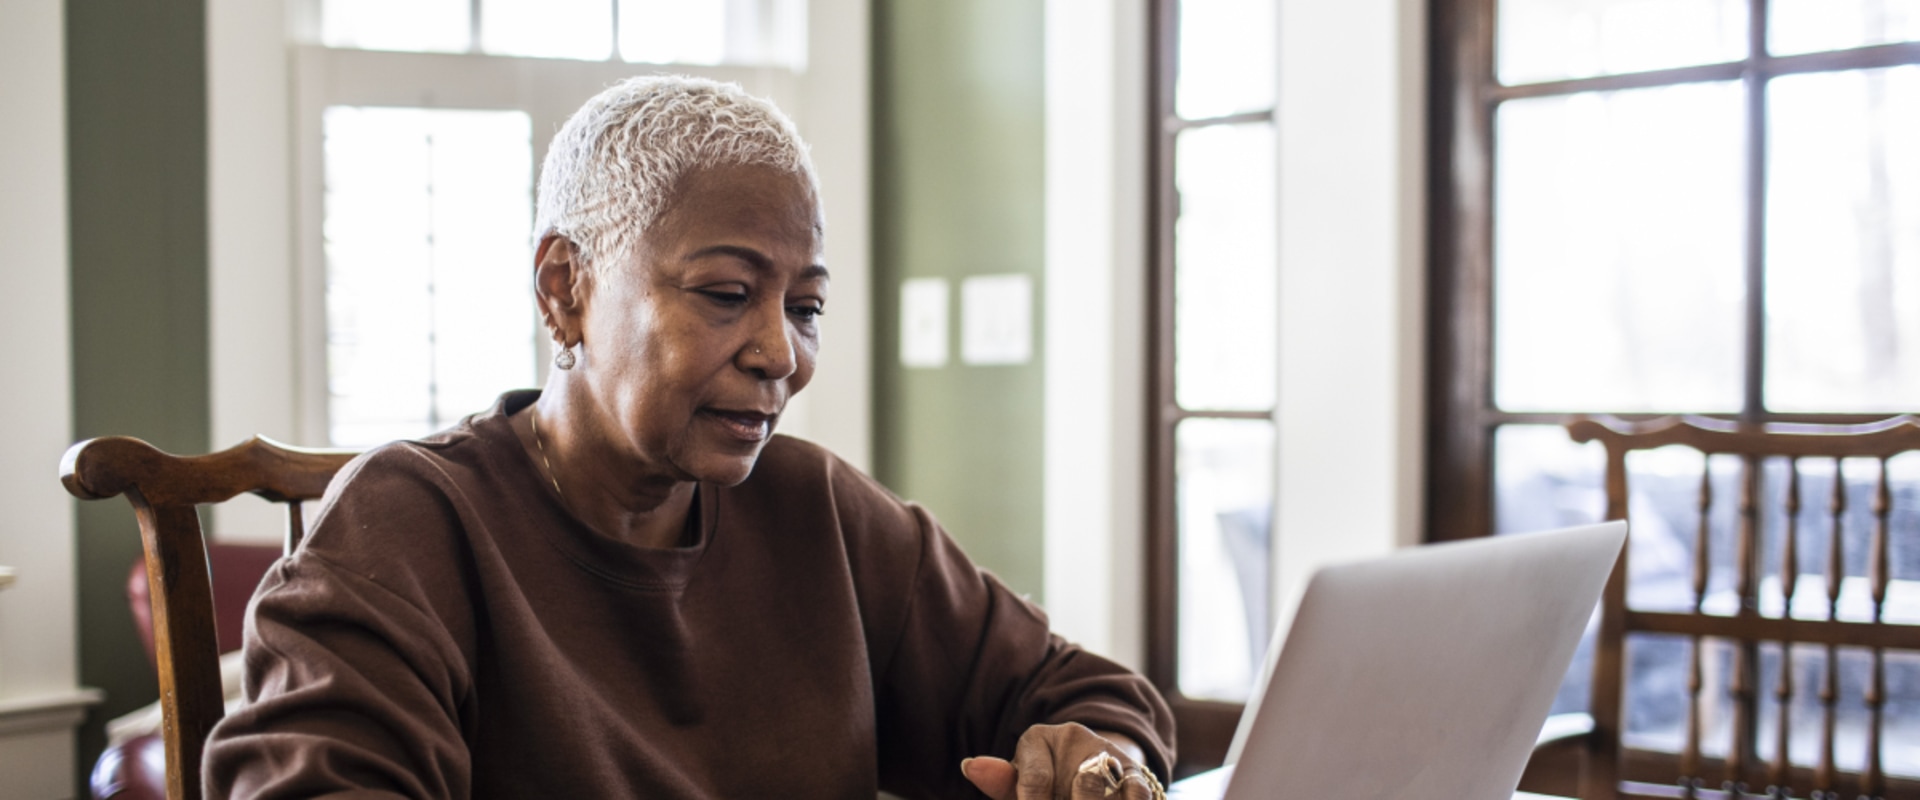 Online Security Tips for Seniors: How to Protect Your Privacy and Stay Safe